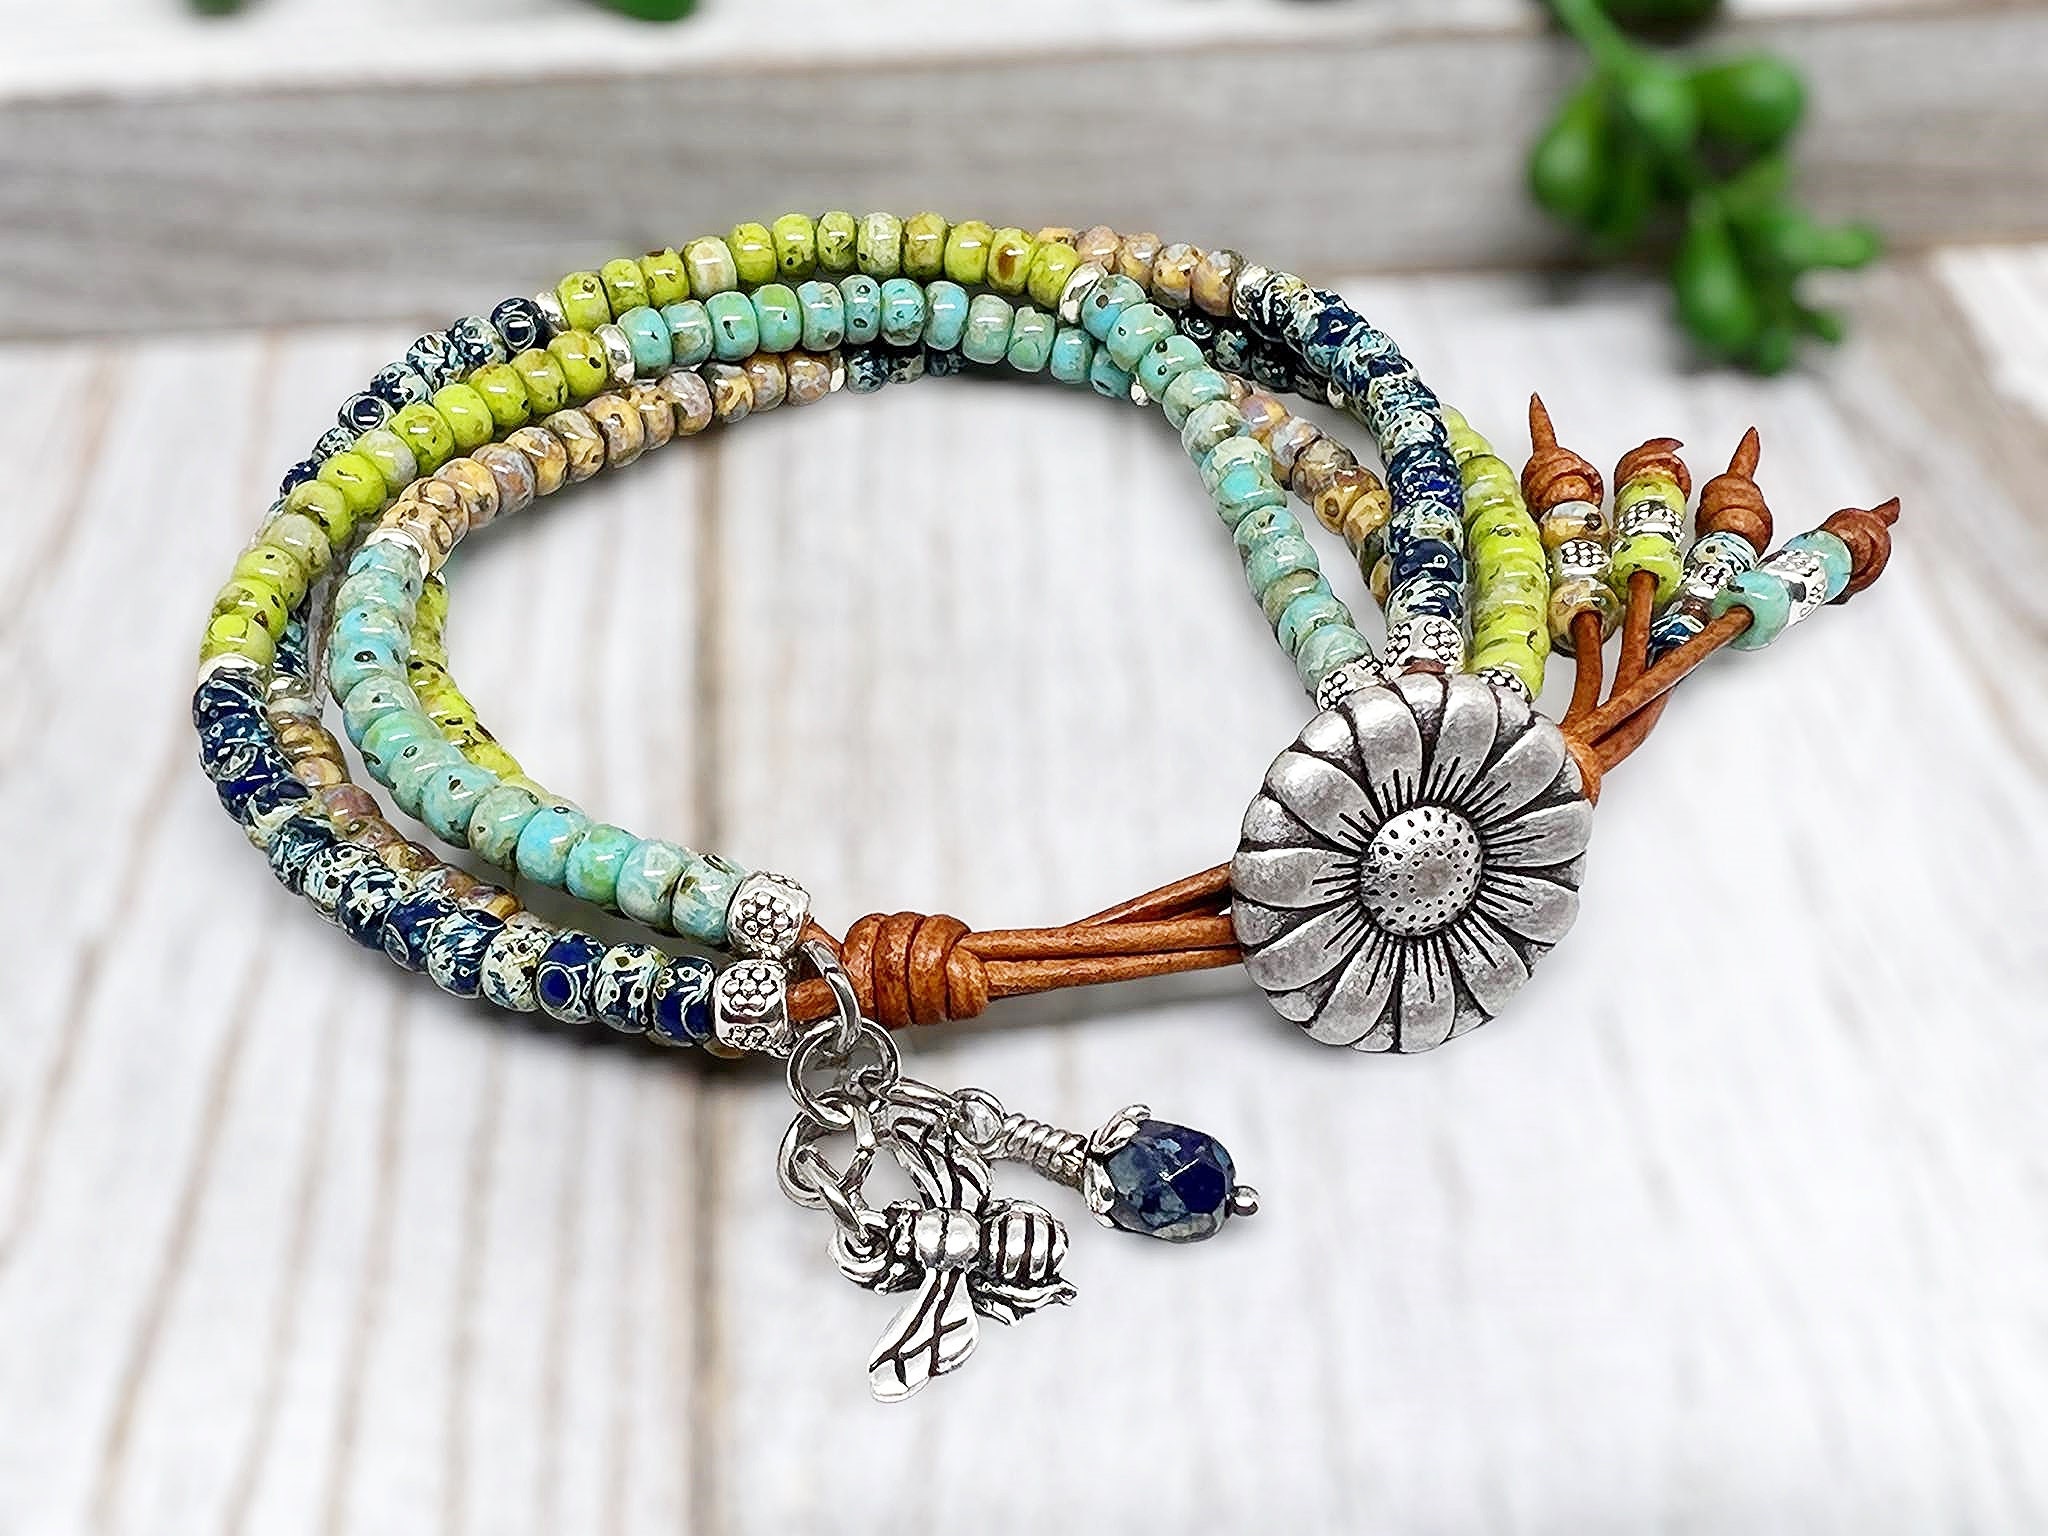 Colorful Seed Bead Macrame Bracelet With Charm Handmade Bohemian Friendship  Jewelry For Women, Perfect For Beach Parties And Gifting From Xiteng04,  $1.16 | DHgate.Com